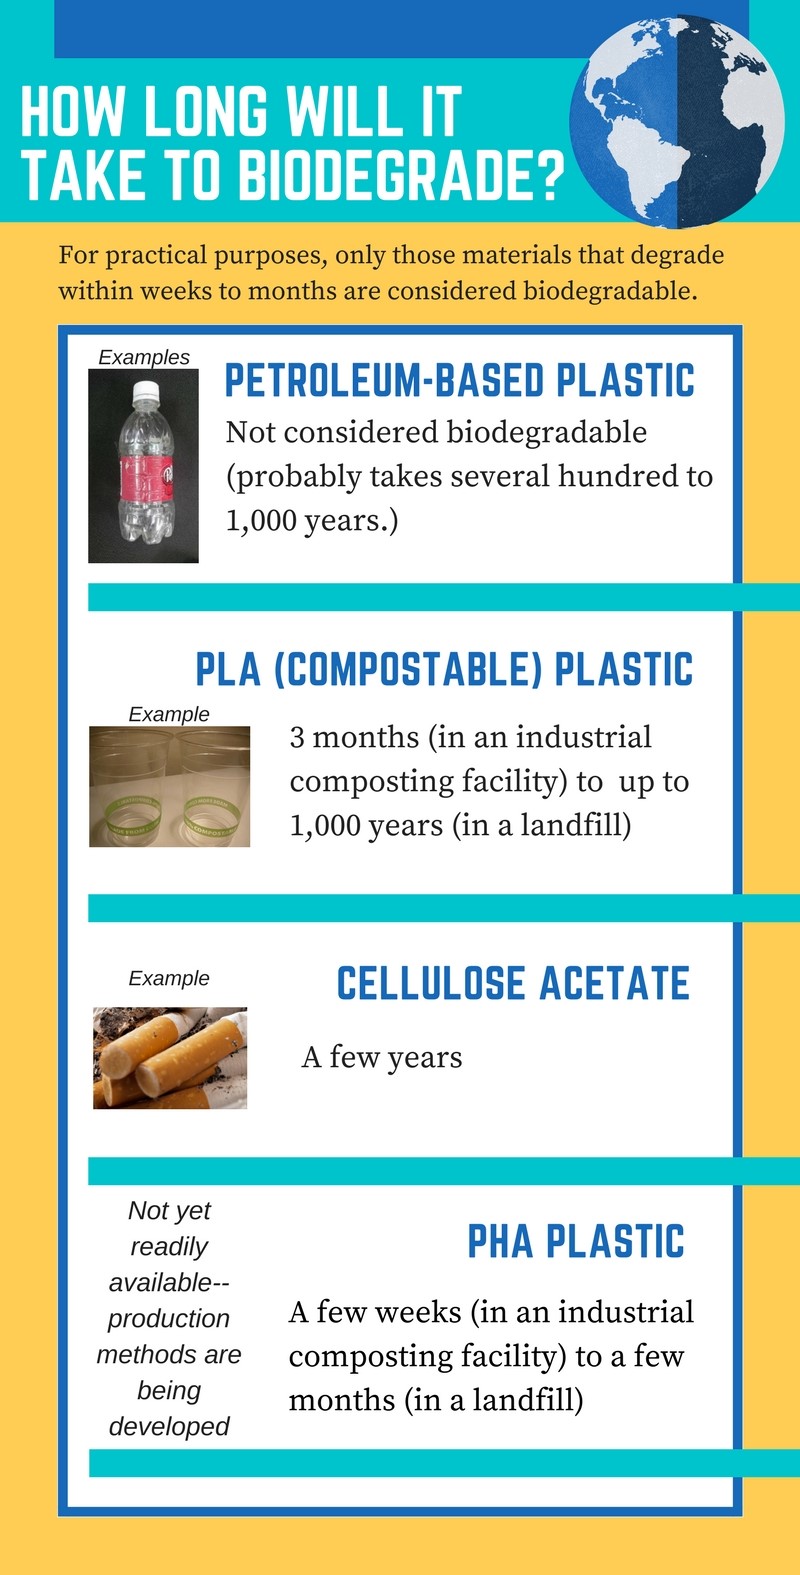 Infographic showing that petroleum-based plastic is not considered biodegradable, and probably takes several hundred to 1,000 years to degrade. Plant-based PLA plastic will compost in about 3 months in an industrial composting facility, but can last up to 1,000 years in a landfill. Cellulose acetate, like that used in cigarette butts, lasts a few years in the environment. The new bacterial waste-based PHA plastic will compost within a few weeks ( in an industrial composting facility) to a few months (in a landfill).